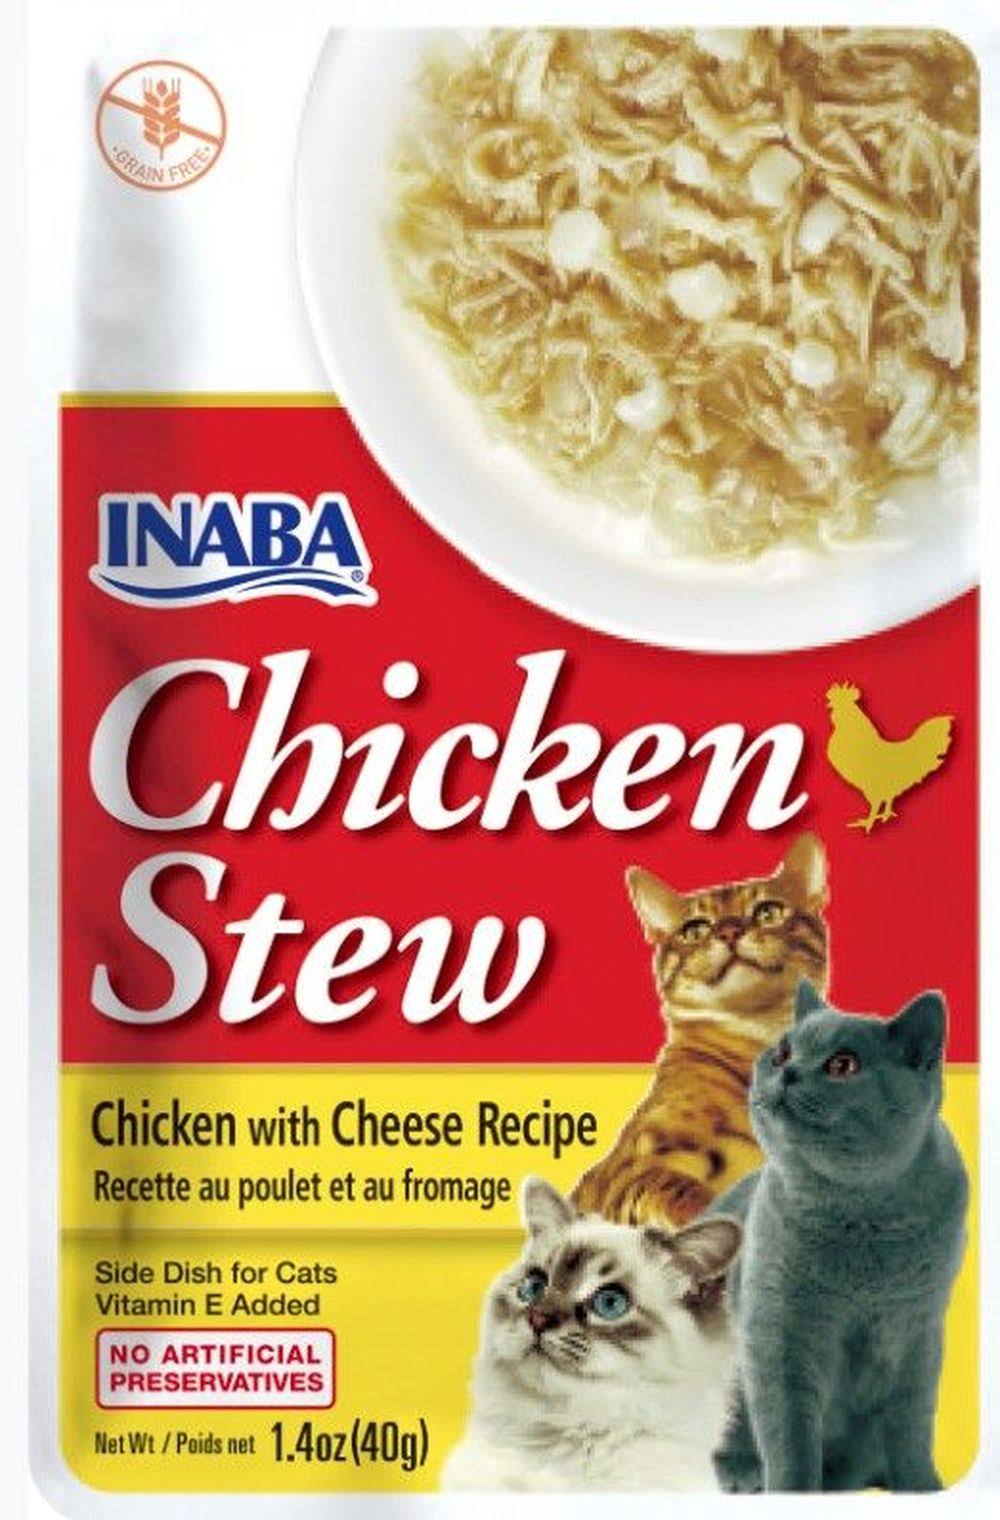 Inaba Chicken Stew Chicken with Cheese Recipe Side Dish for Cats (1.4oz)